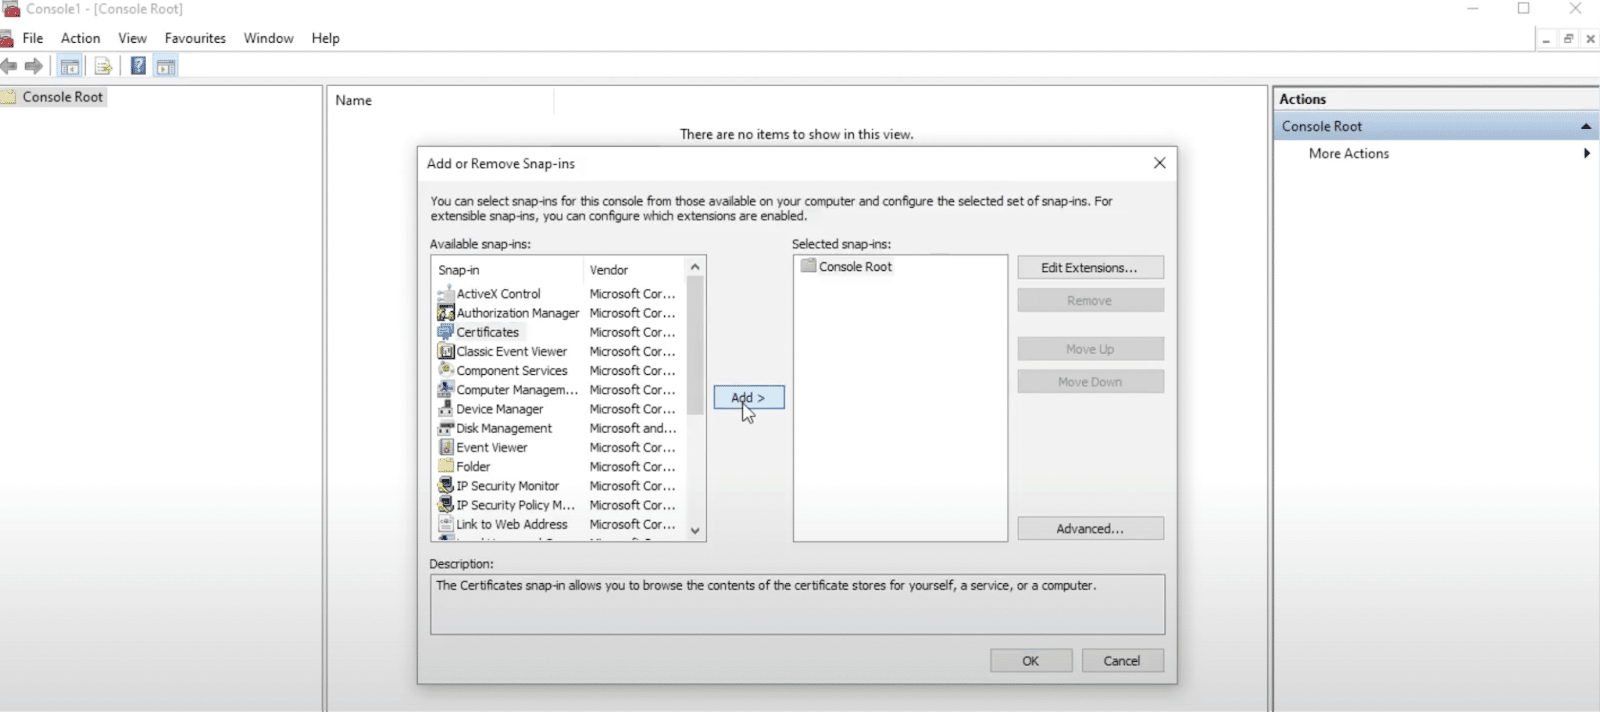 Adding an SSL certificate to the trusted store in Windows